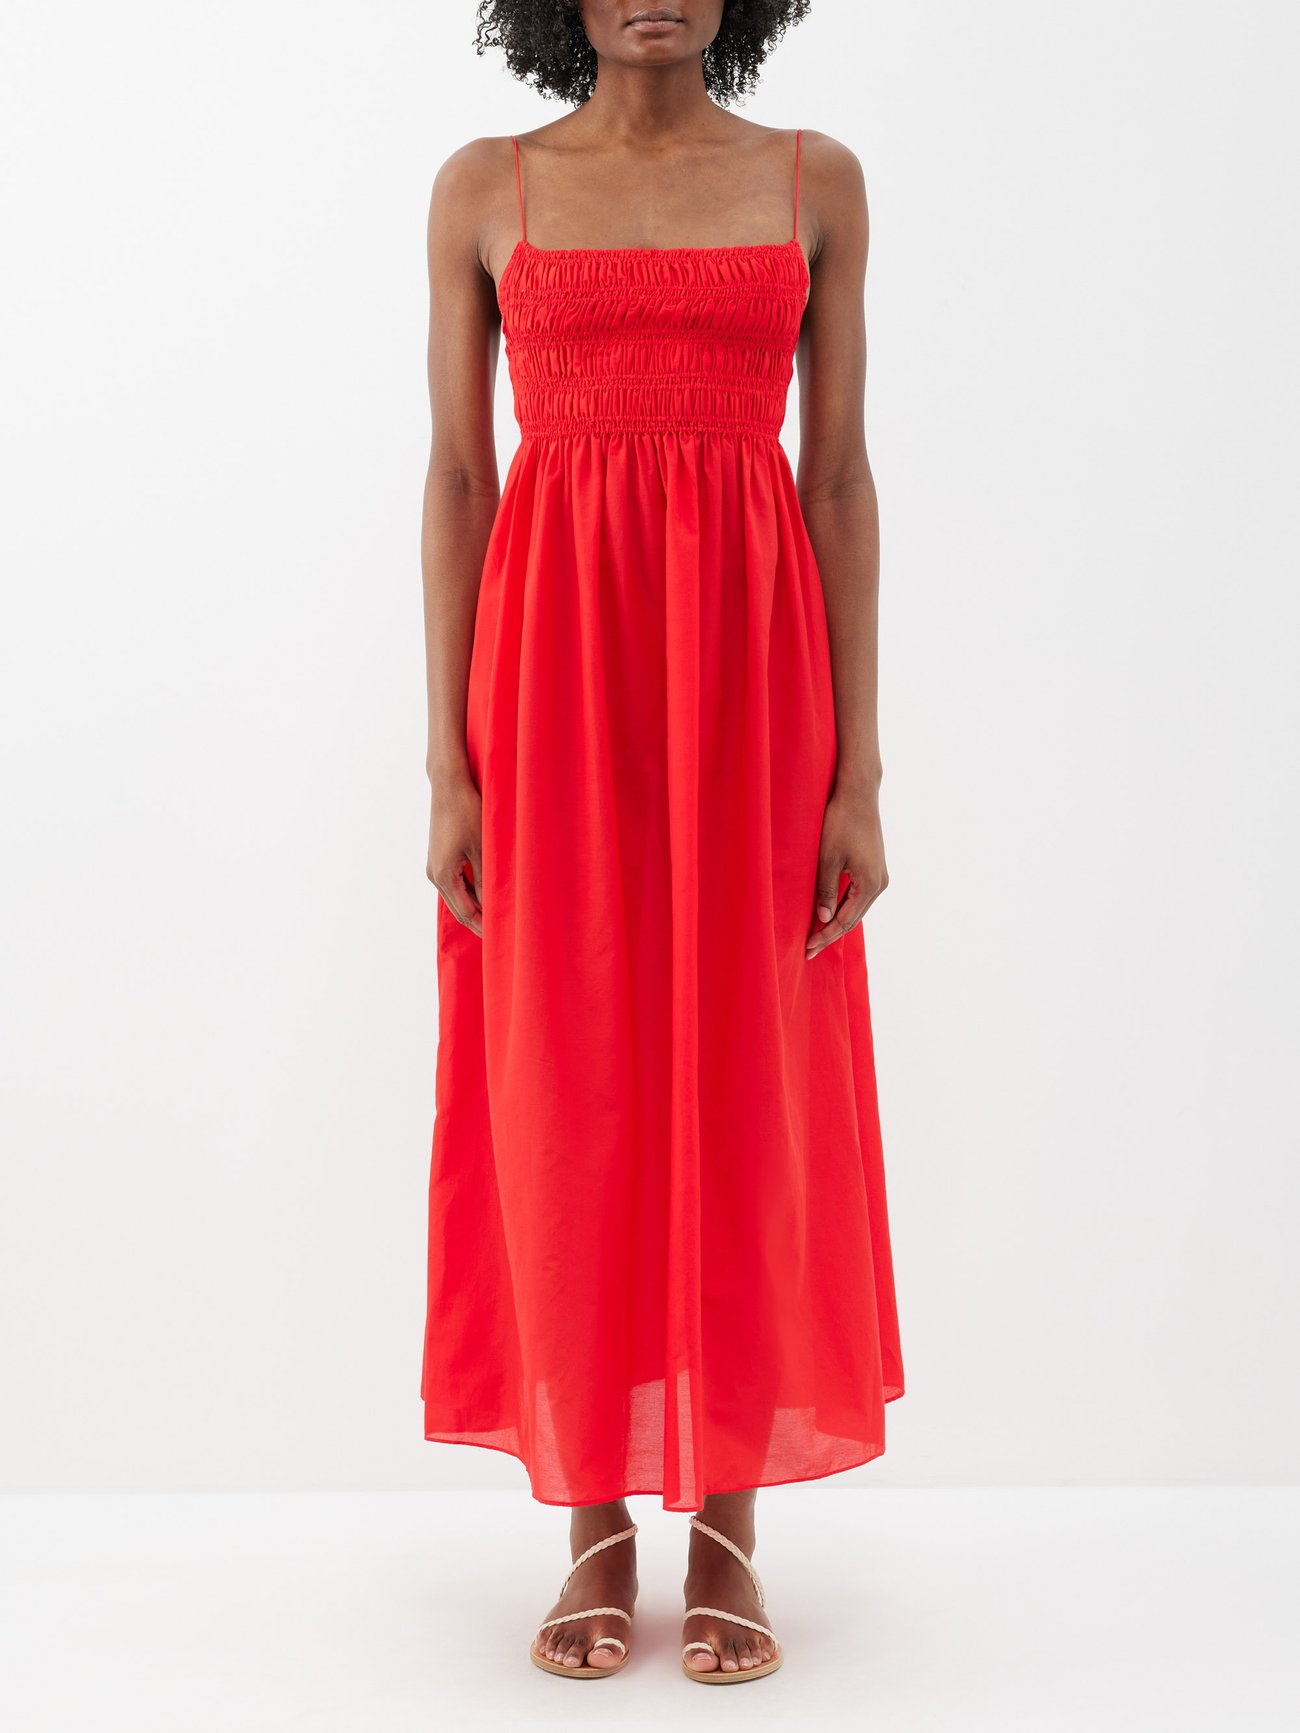 Matteau's red midi dress is made from organic cotton and silk voile exclusively for MATCHES, then shaped with a shirred bust and billowy skirt.